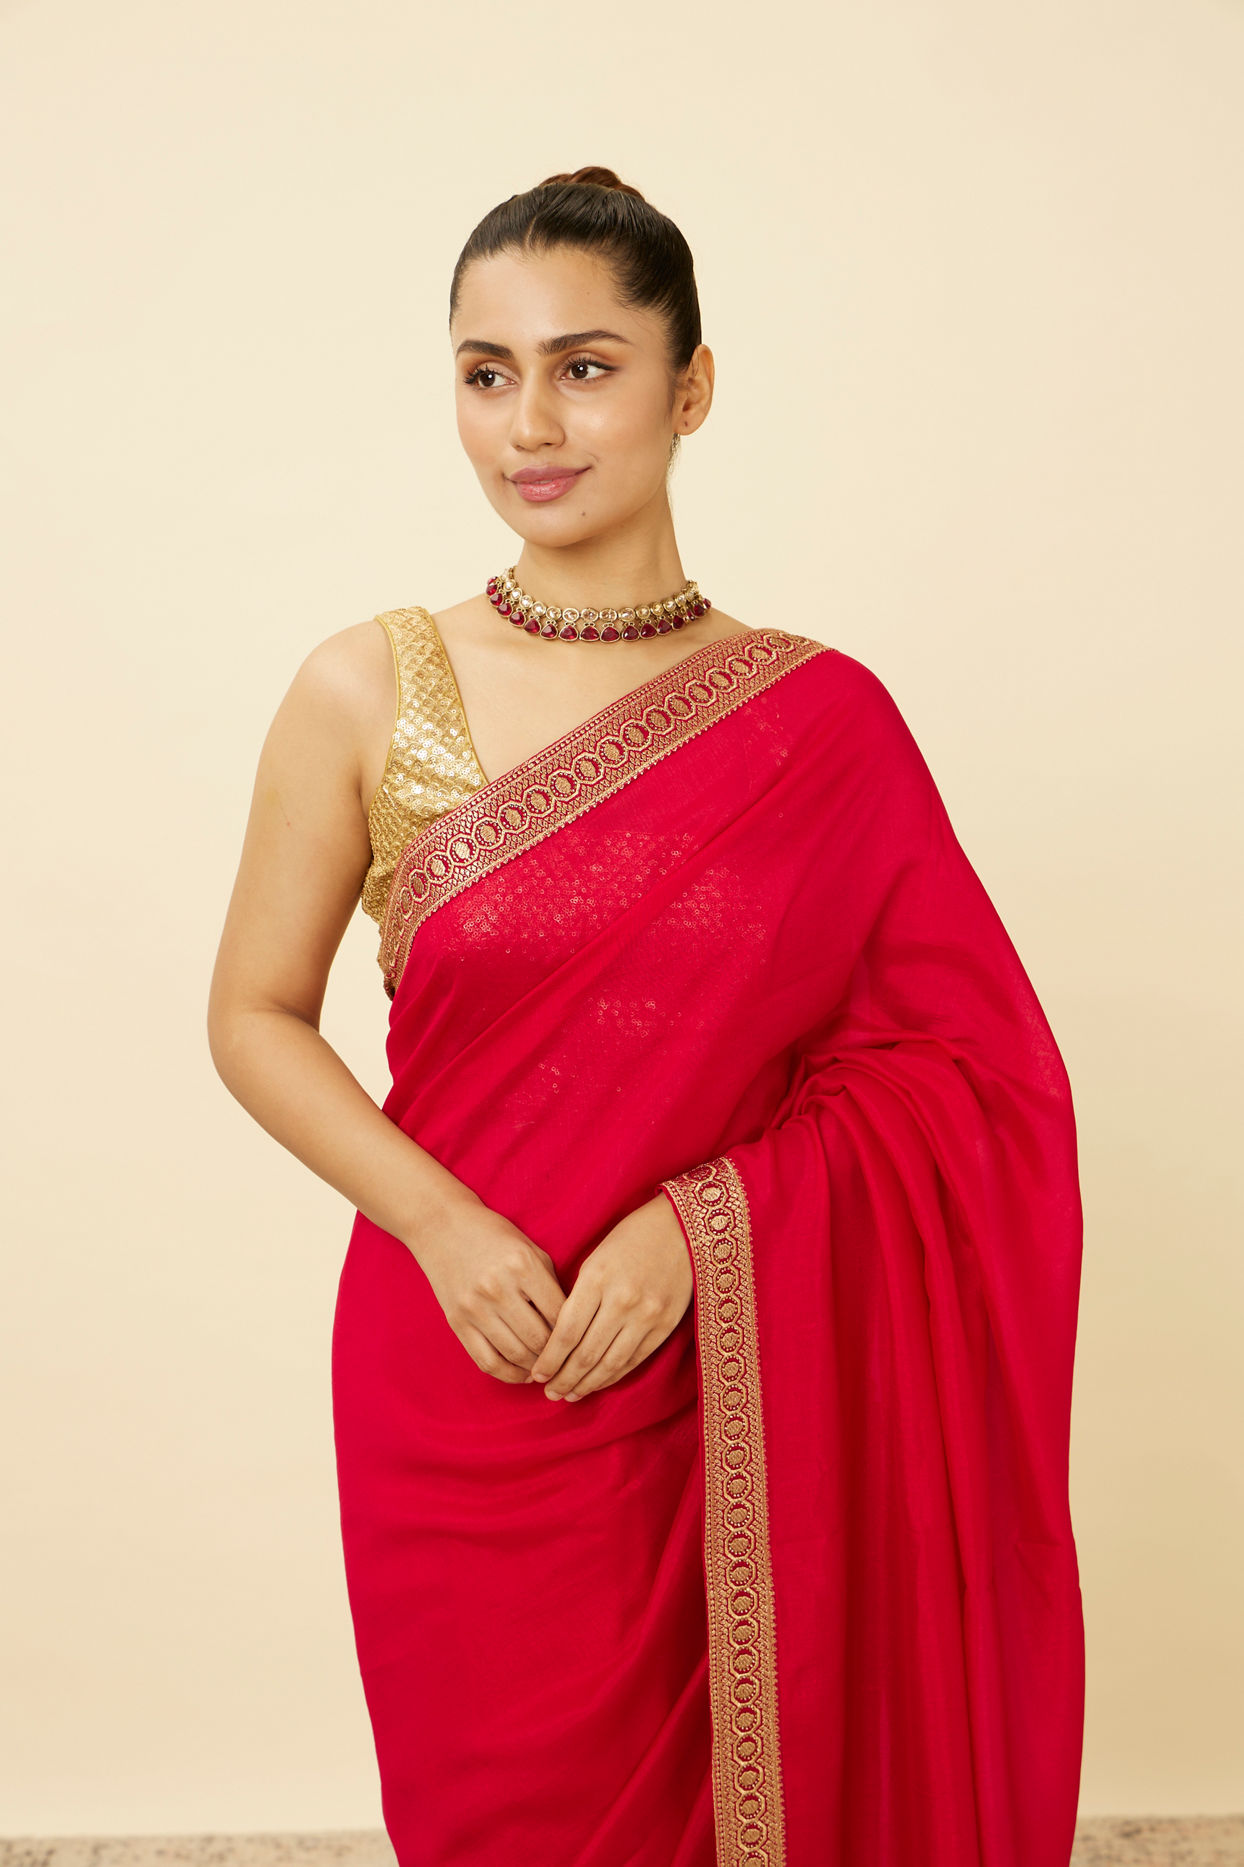 Fiesta Red Saree with Geometrical Patterned Borders image number 1